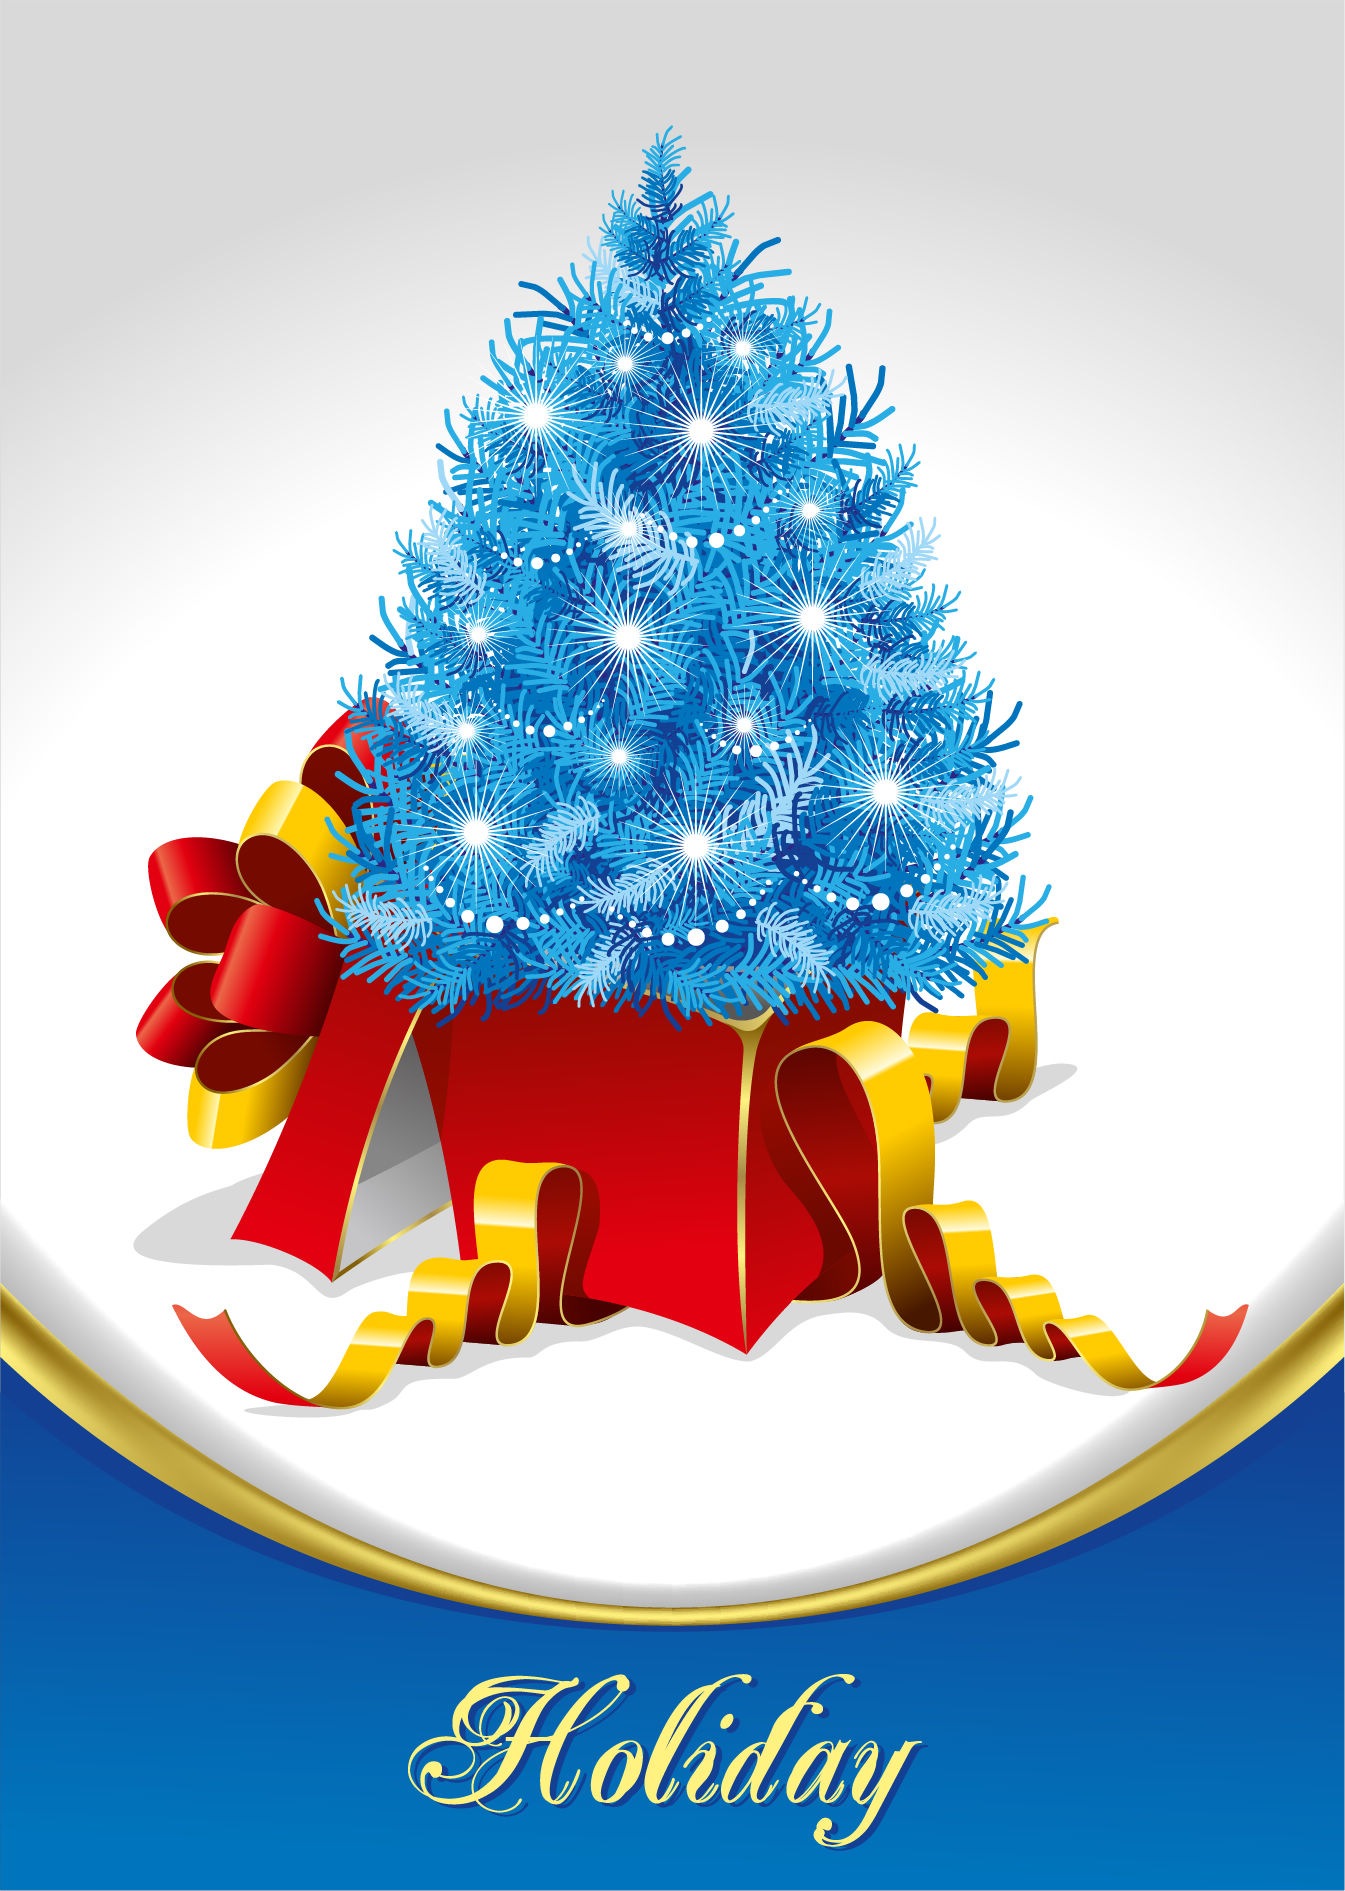 Christmas Tree and Gifts Vector